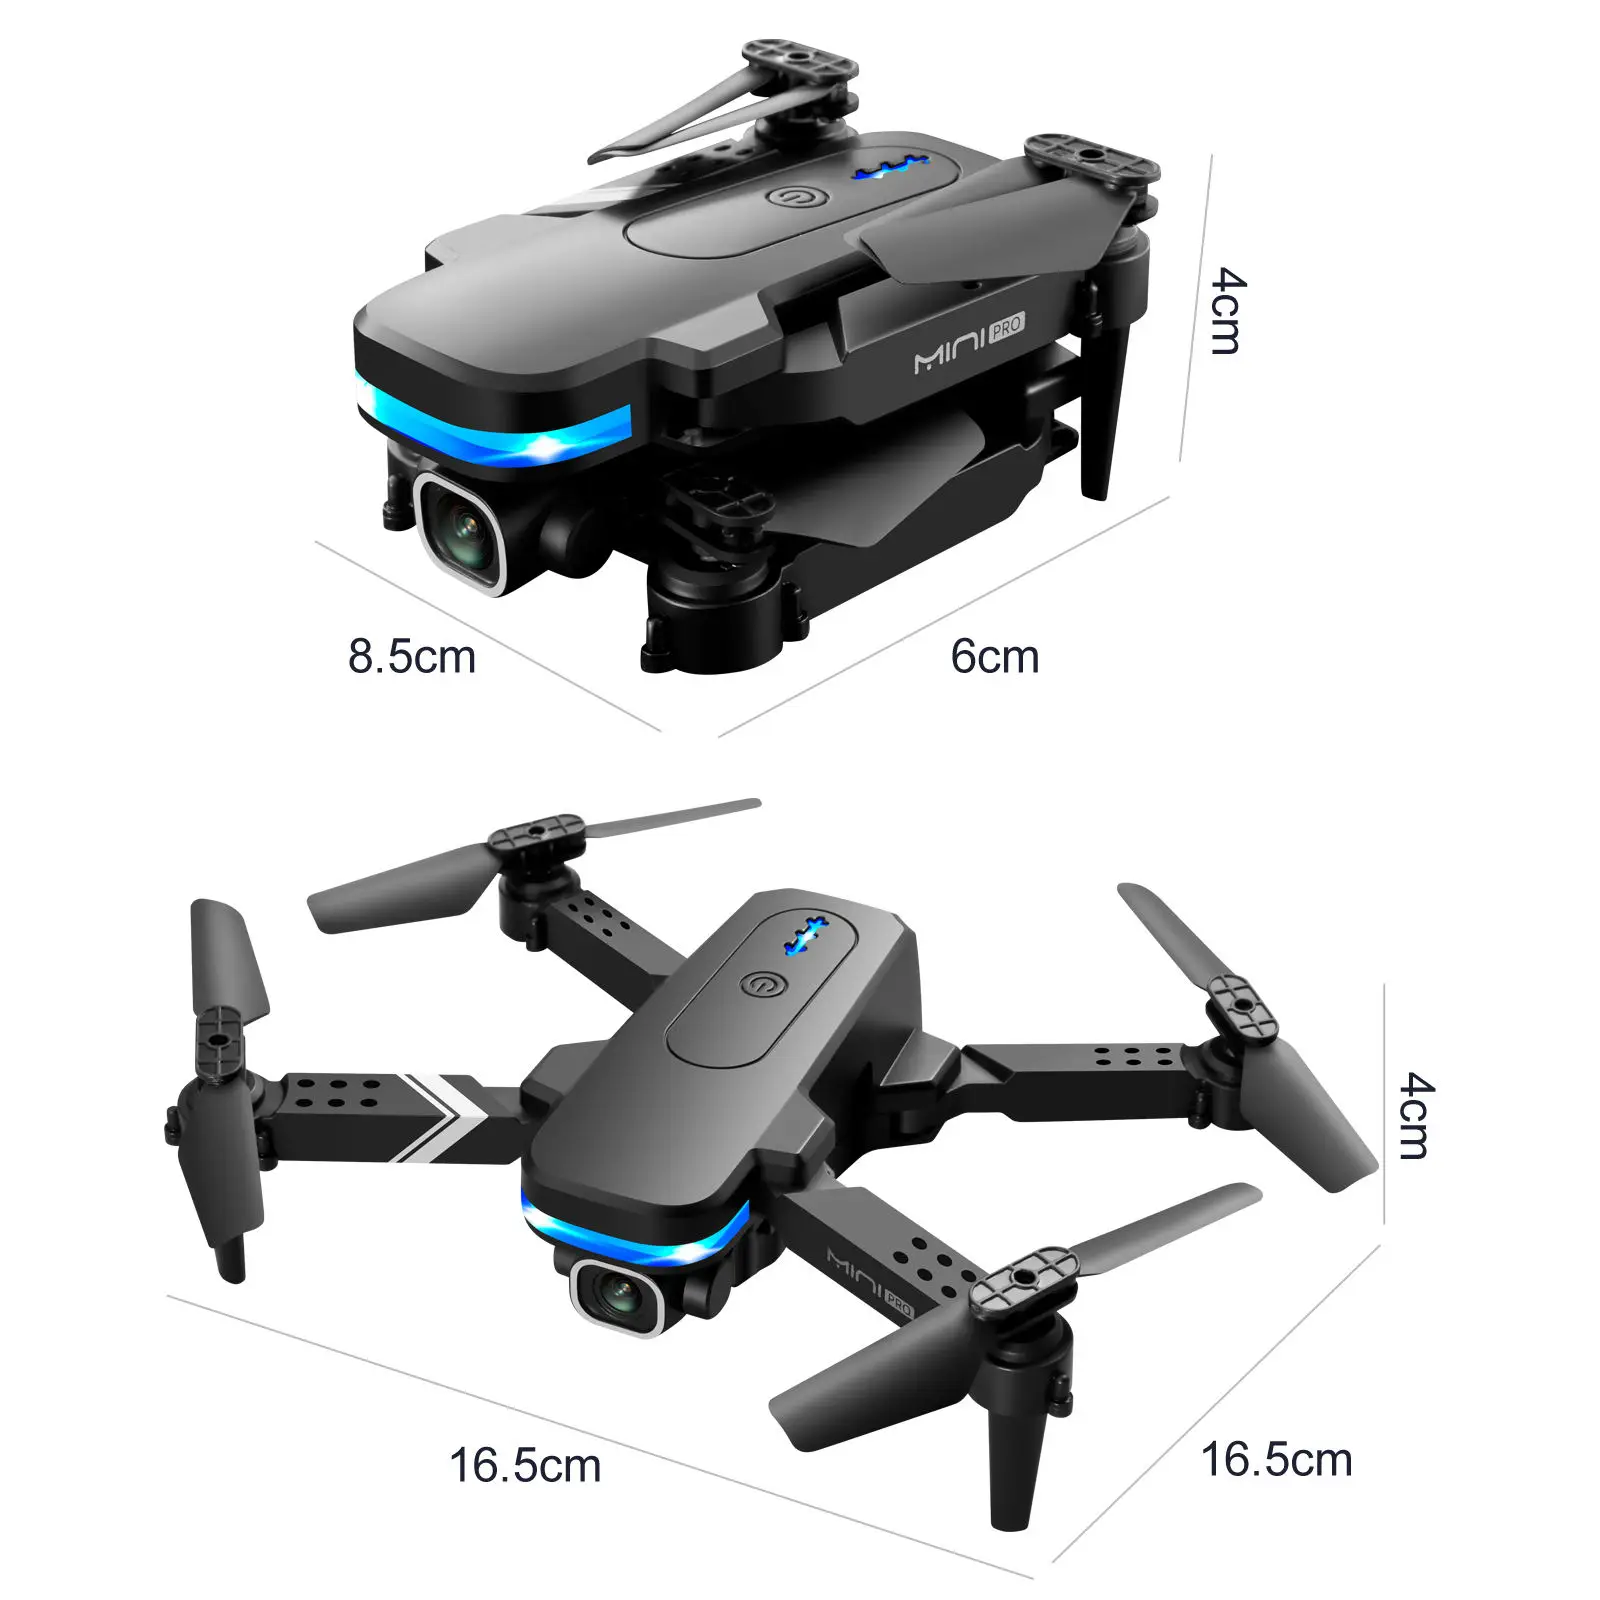 KY910 Foldable Drones Toys Mini 2.4G Remote Control RC Quadcopter Drones 360-Degree Flip with WiFi for Adults Outdoor